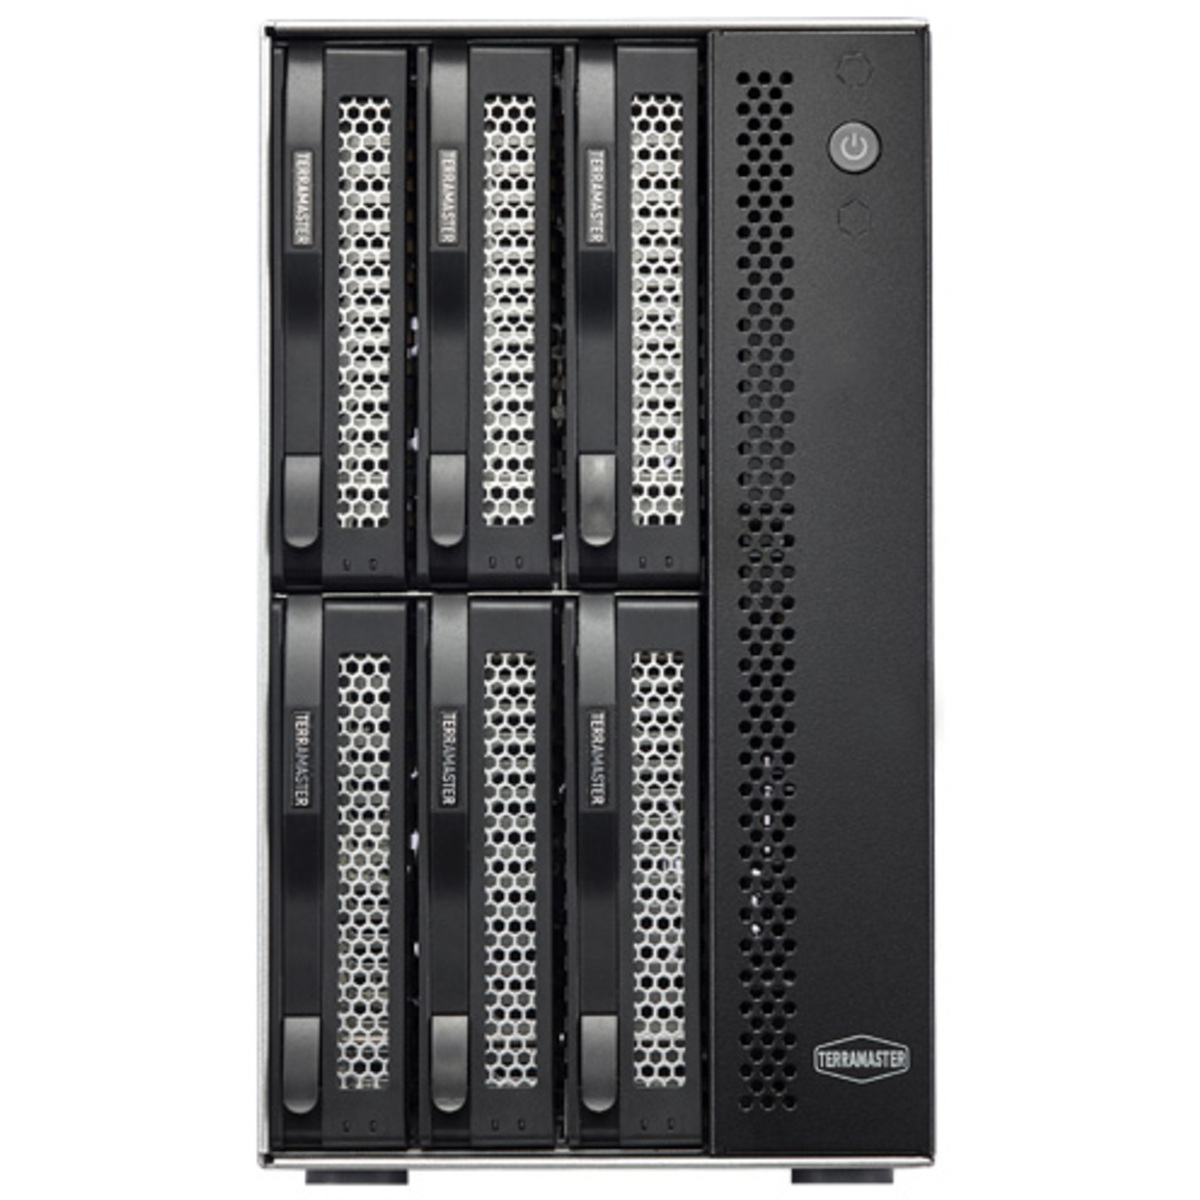 TerraMaster T6-423 60tb 6-Bay Desktop Multimedia / Power User / Business NAS - Network Attached Storage Device 5x12tb Toshiba Enterprise Capacity MG07ACA12TE 3.5 7200rpm SATA 6Gb/s HDD ENTERPRISE Class Drives Installed - Burn-In Tested - FREE RAM UPGRADE T6-423